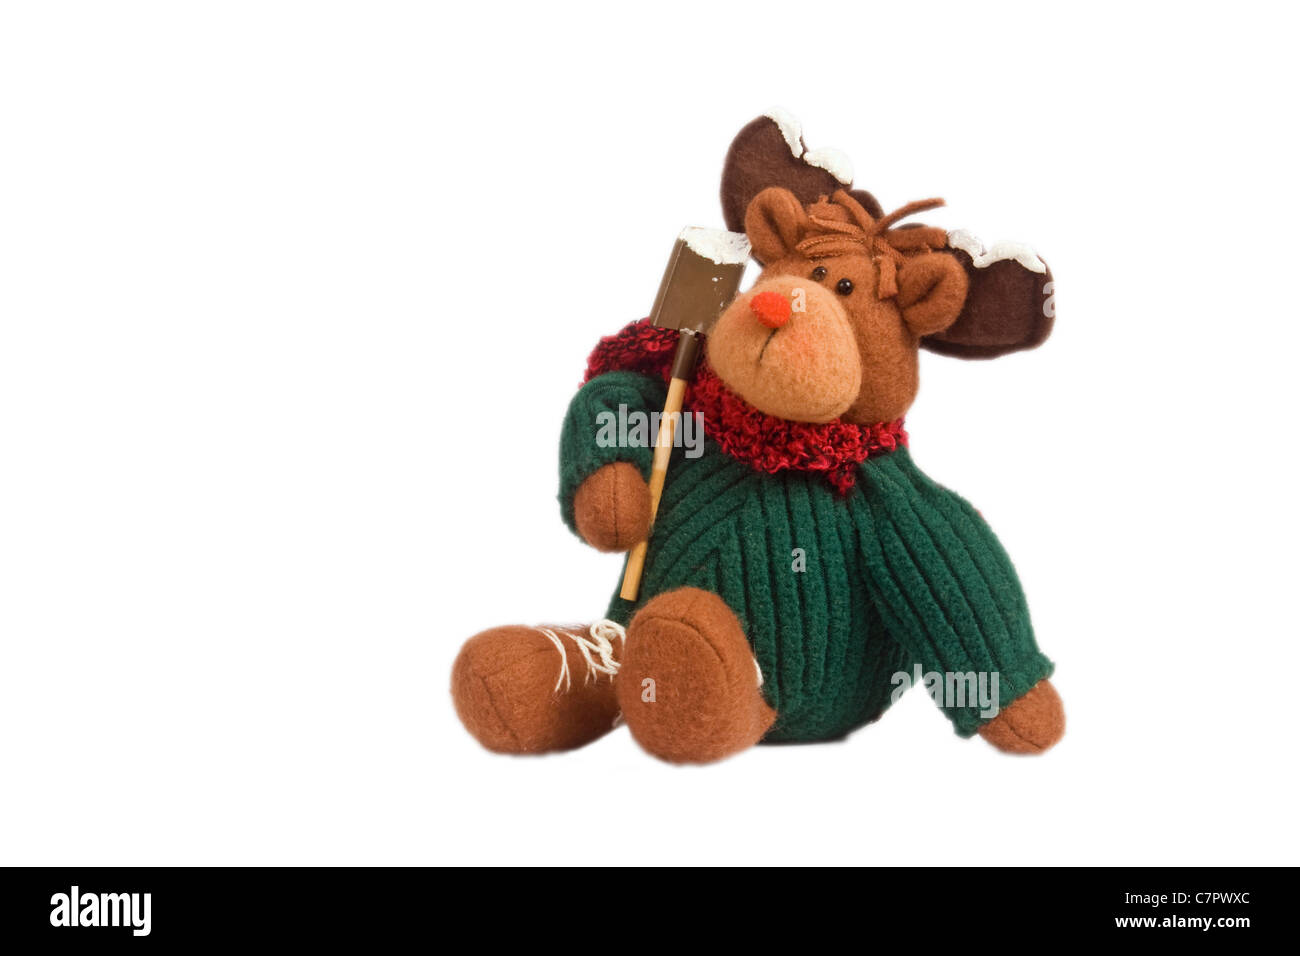 Soft toy of Rudolph the red nosed reindeer carrying a spade, with a white background. Stock Photo